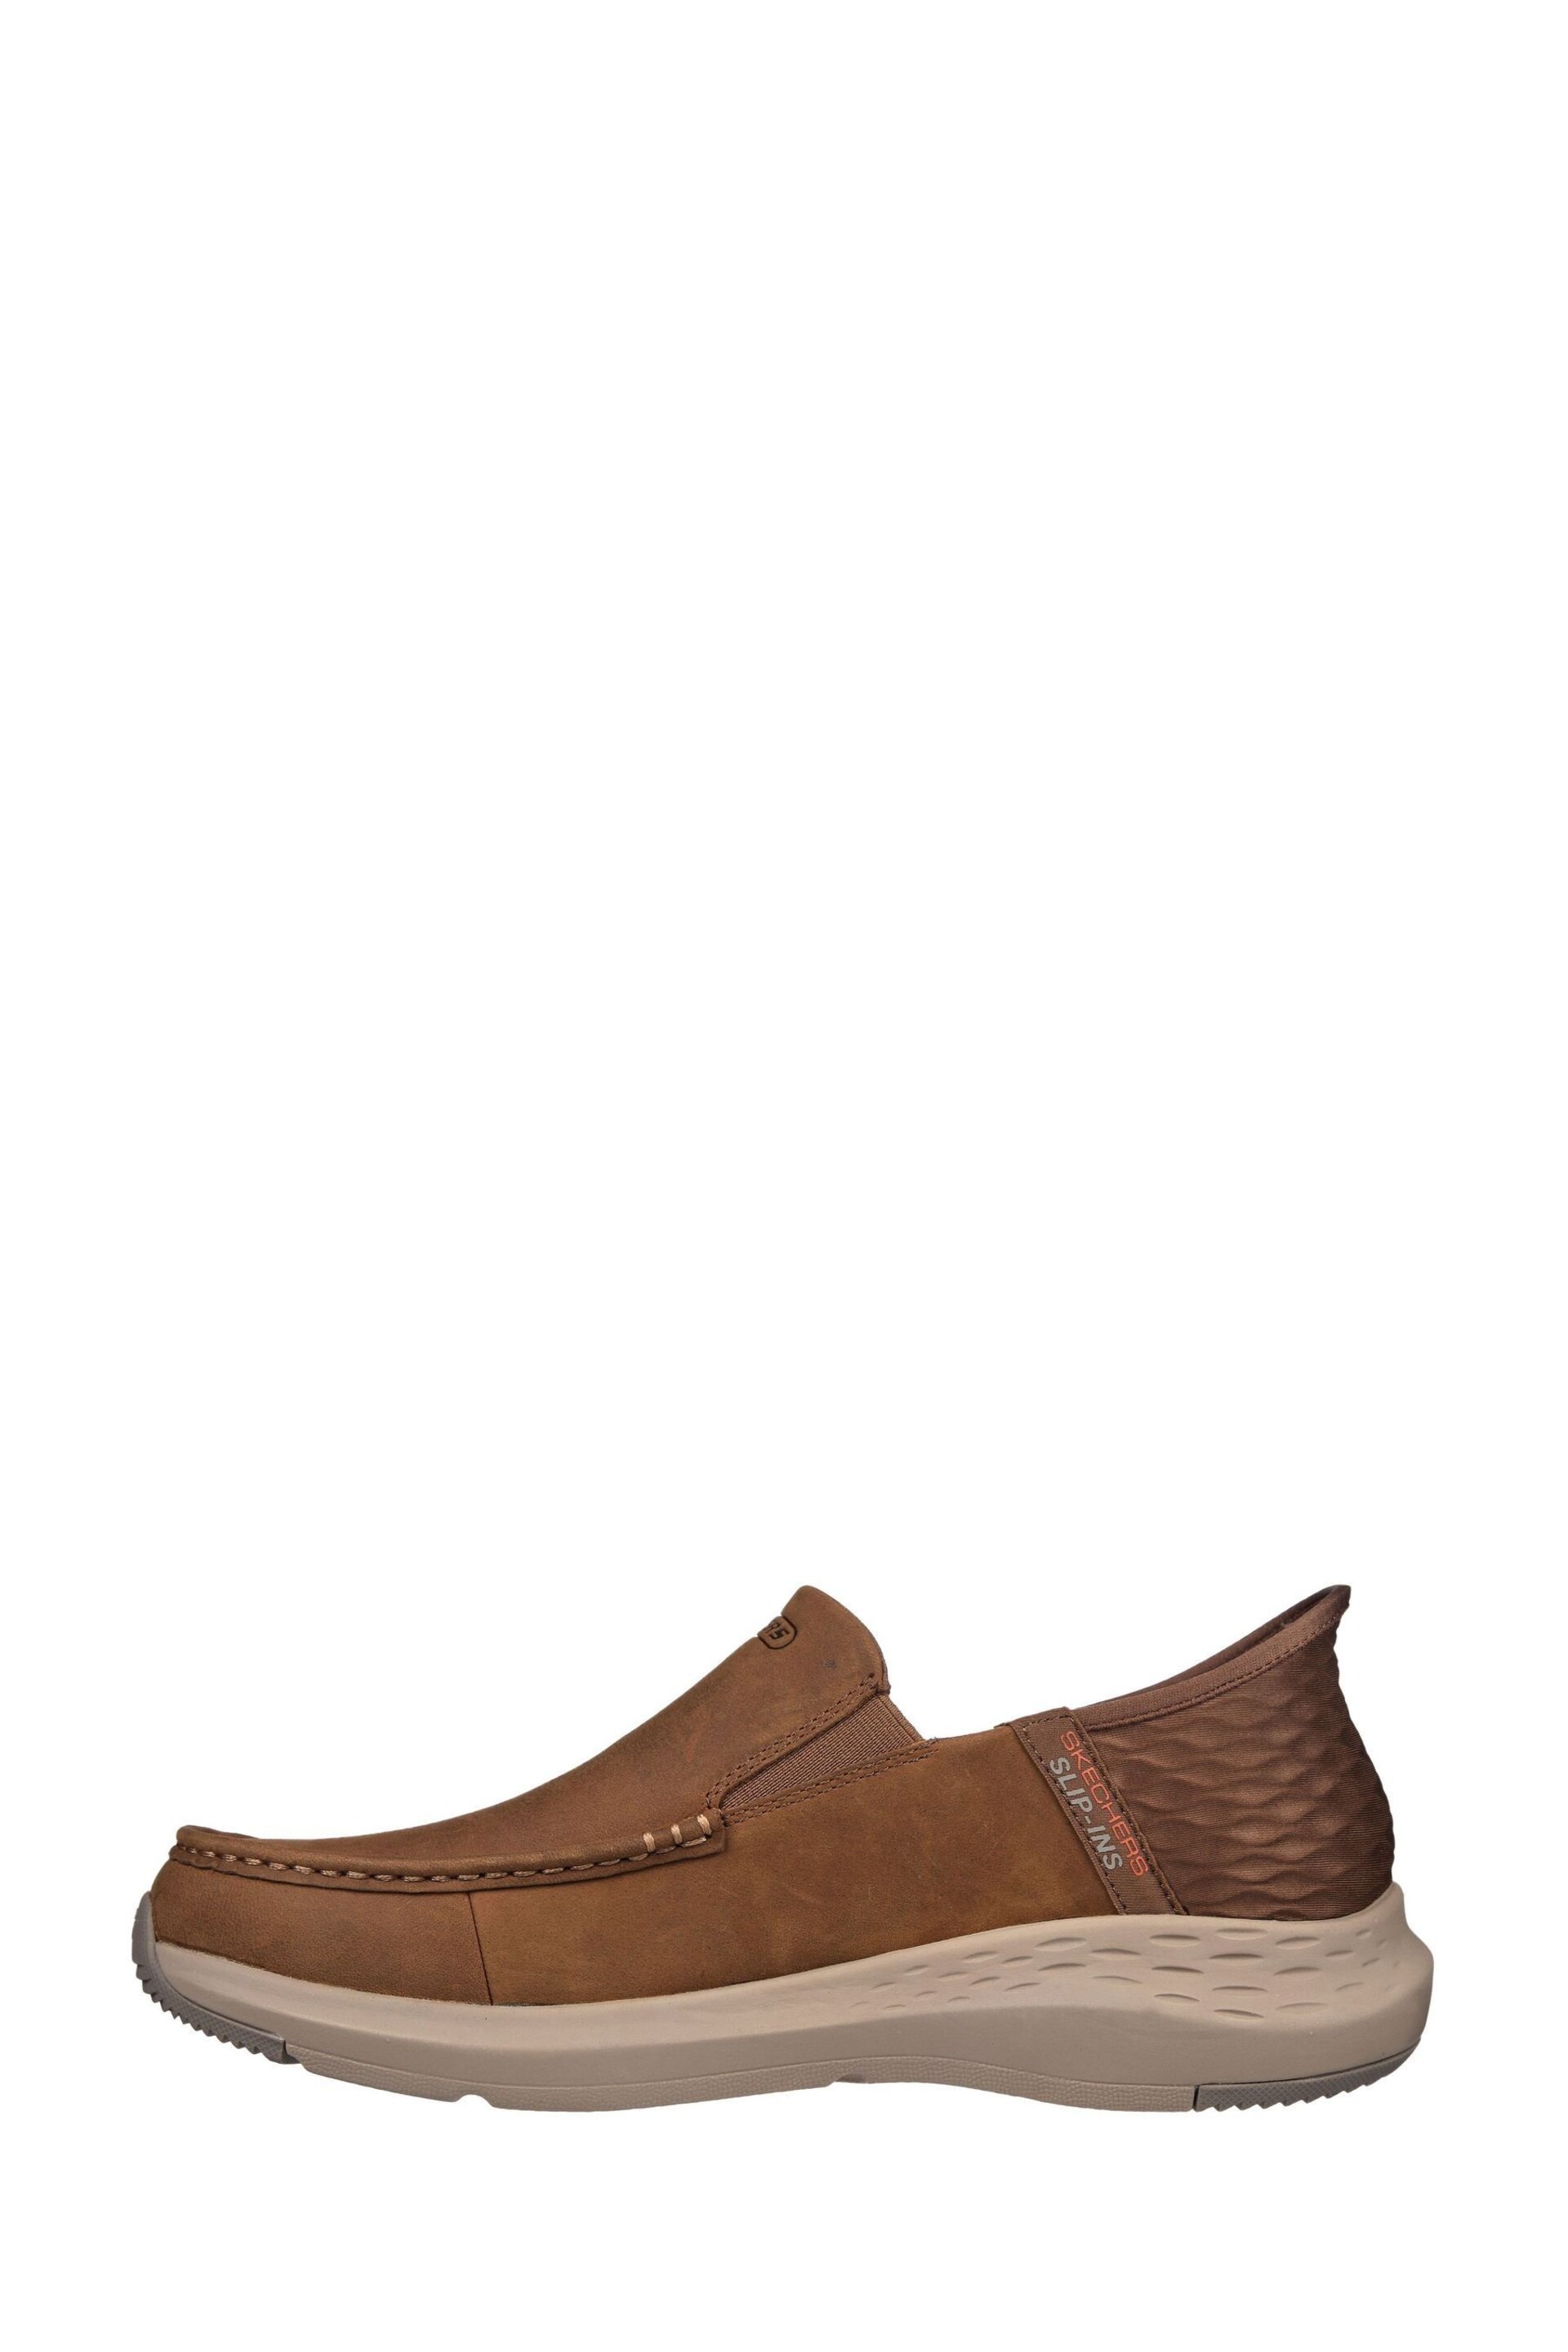 Skechers Brown Parson Oswin Shoes - Image 4 of 6